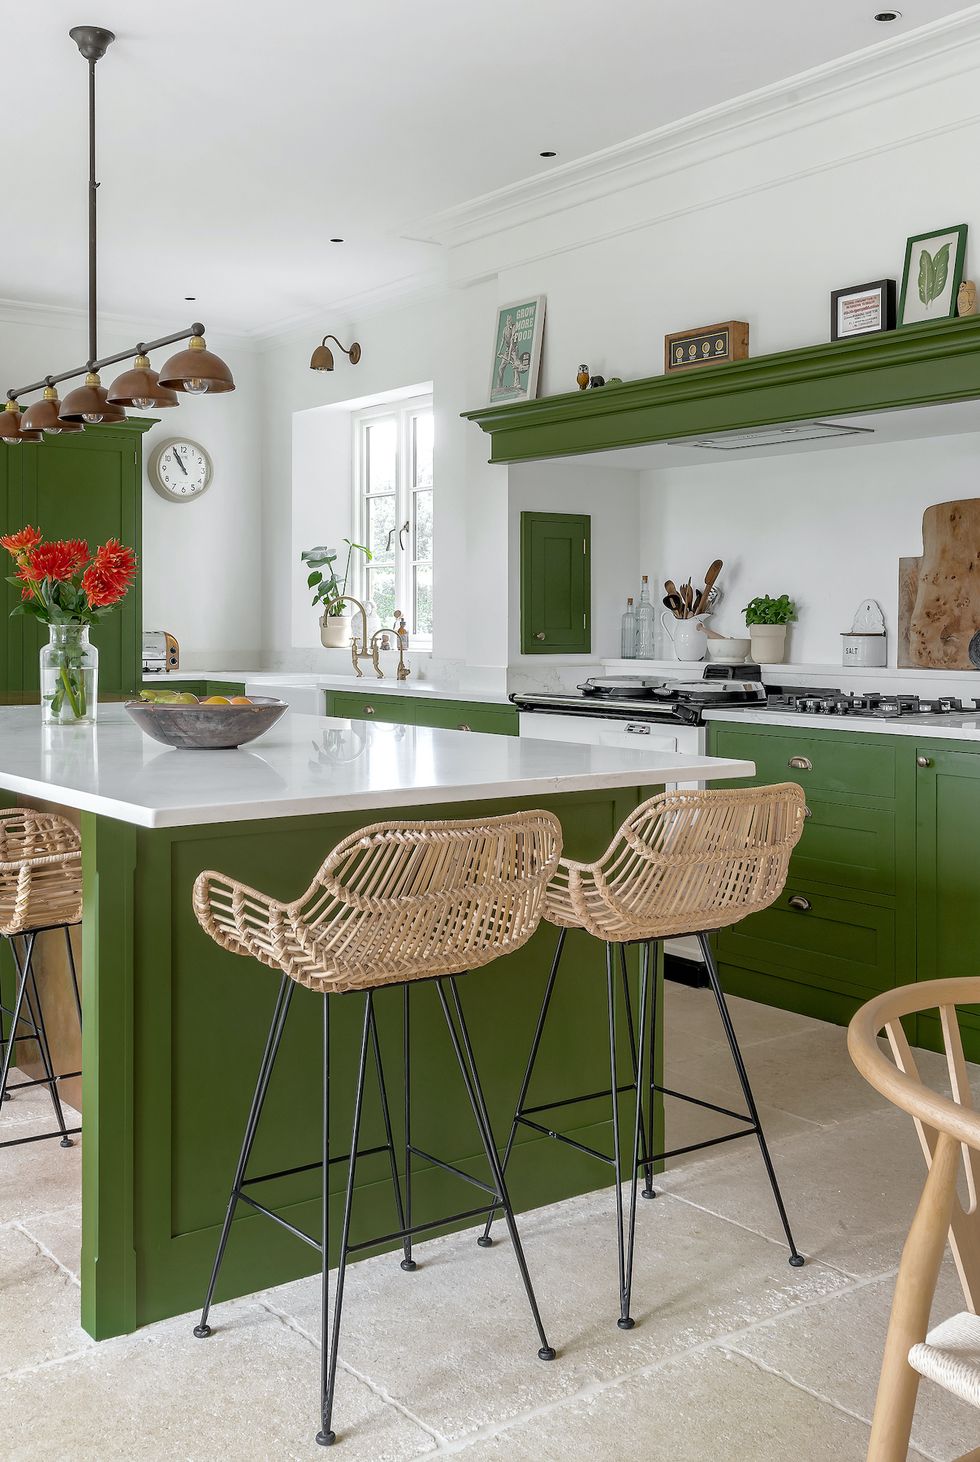 https://hips.hearstapps.com/hmg-prod/images/green-kitchens-cotswold-farmhouse-kitchen-langstone-farmhouse-by-pete-helme-photography-1644963971.jpg?crop=0.447xw:1.00xh;0.0986xw,0&resize=980:*